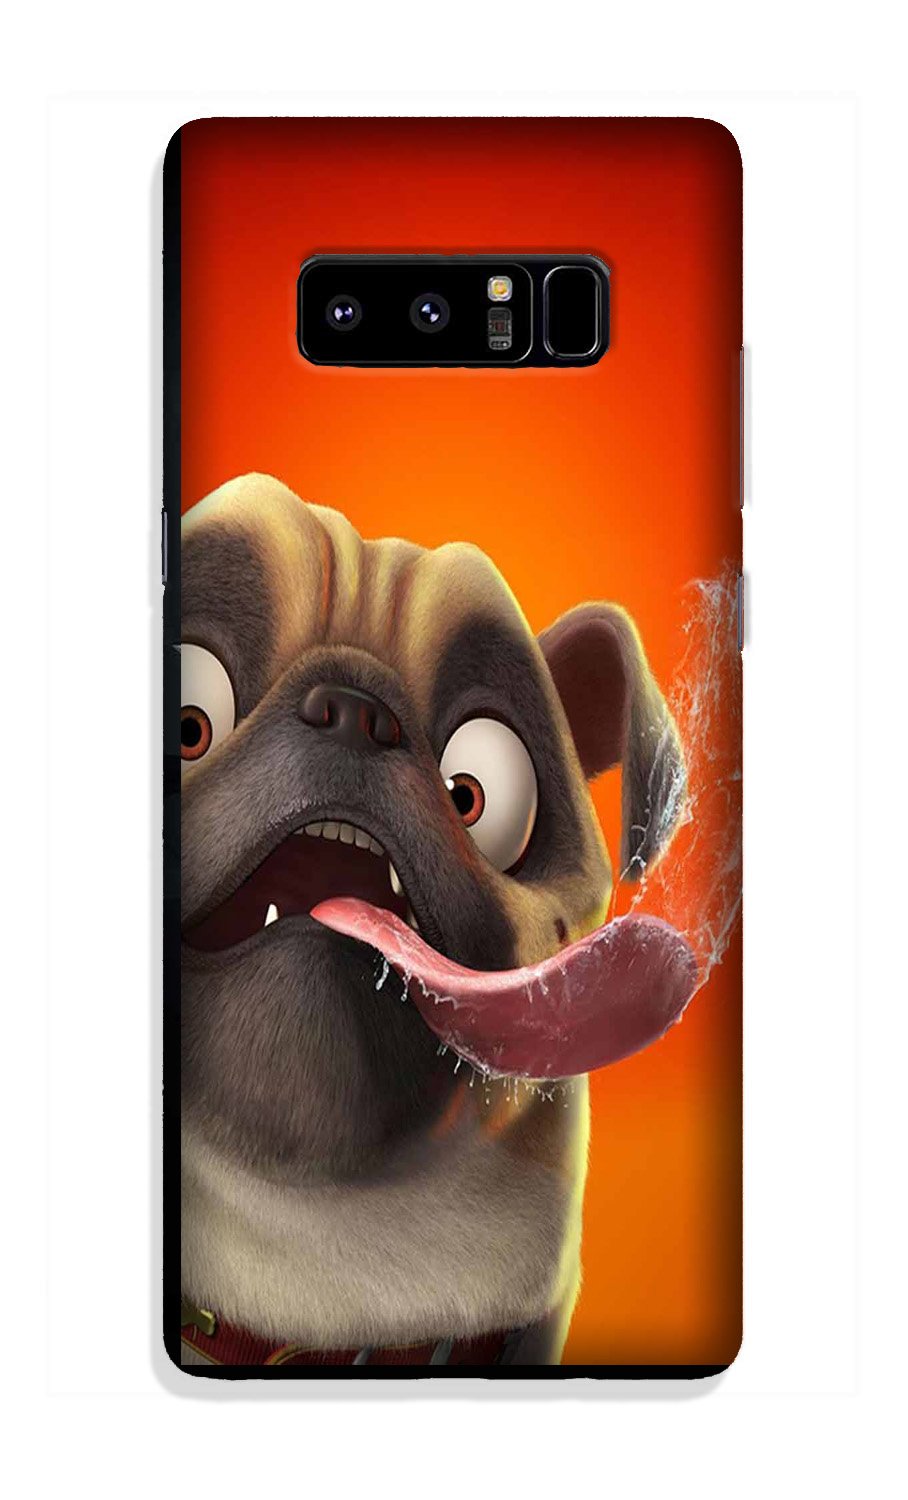 Dog Mobile Back Case for Galaxy Note 8 (Design - 343)